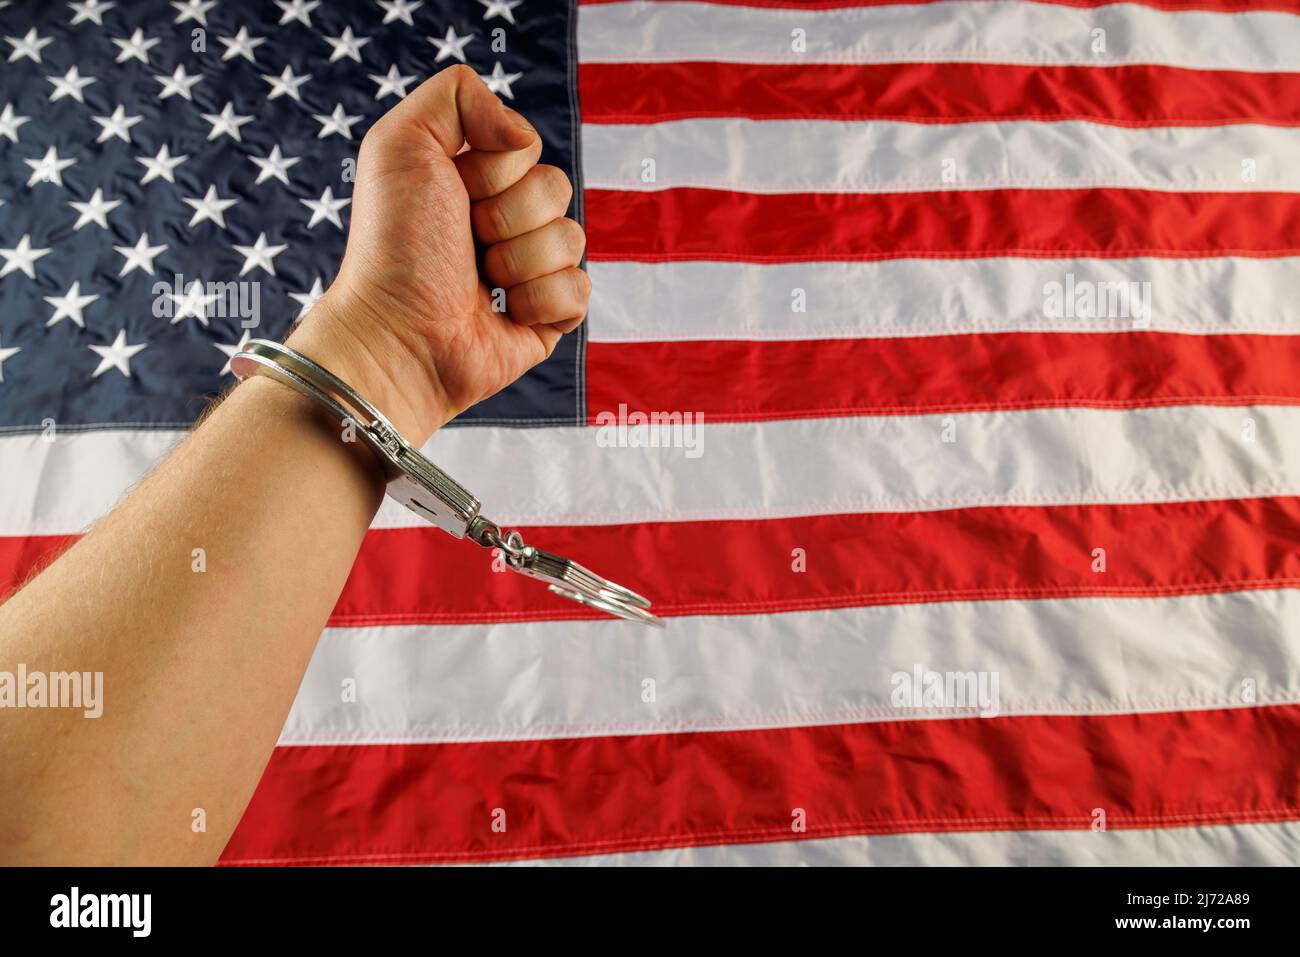 caucasian hand cuffed with silver metal handcuffs over US flag background Stock Photo